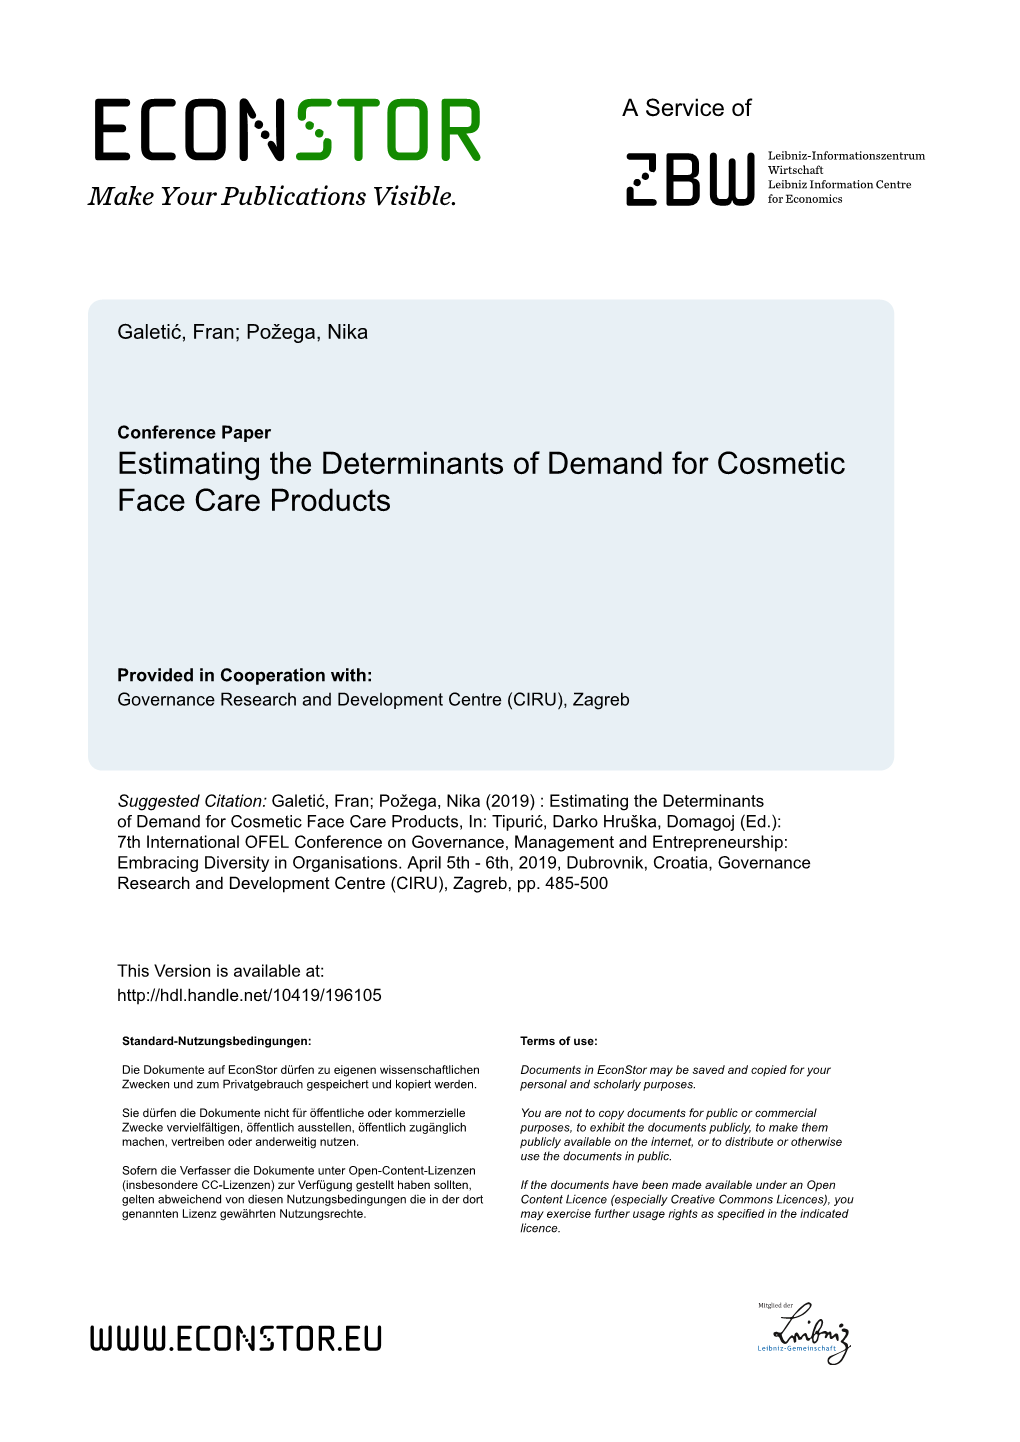 Estimating the Determinants of Demand for Cosmetic Face Care Products